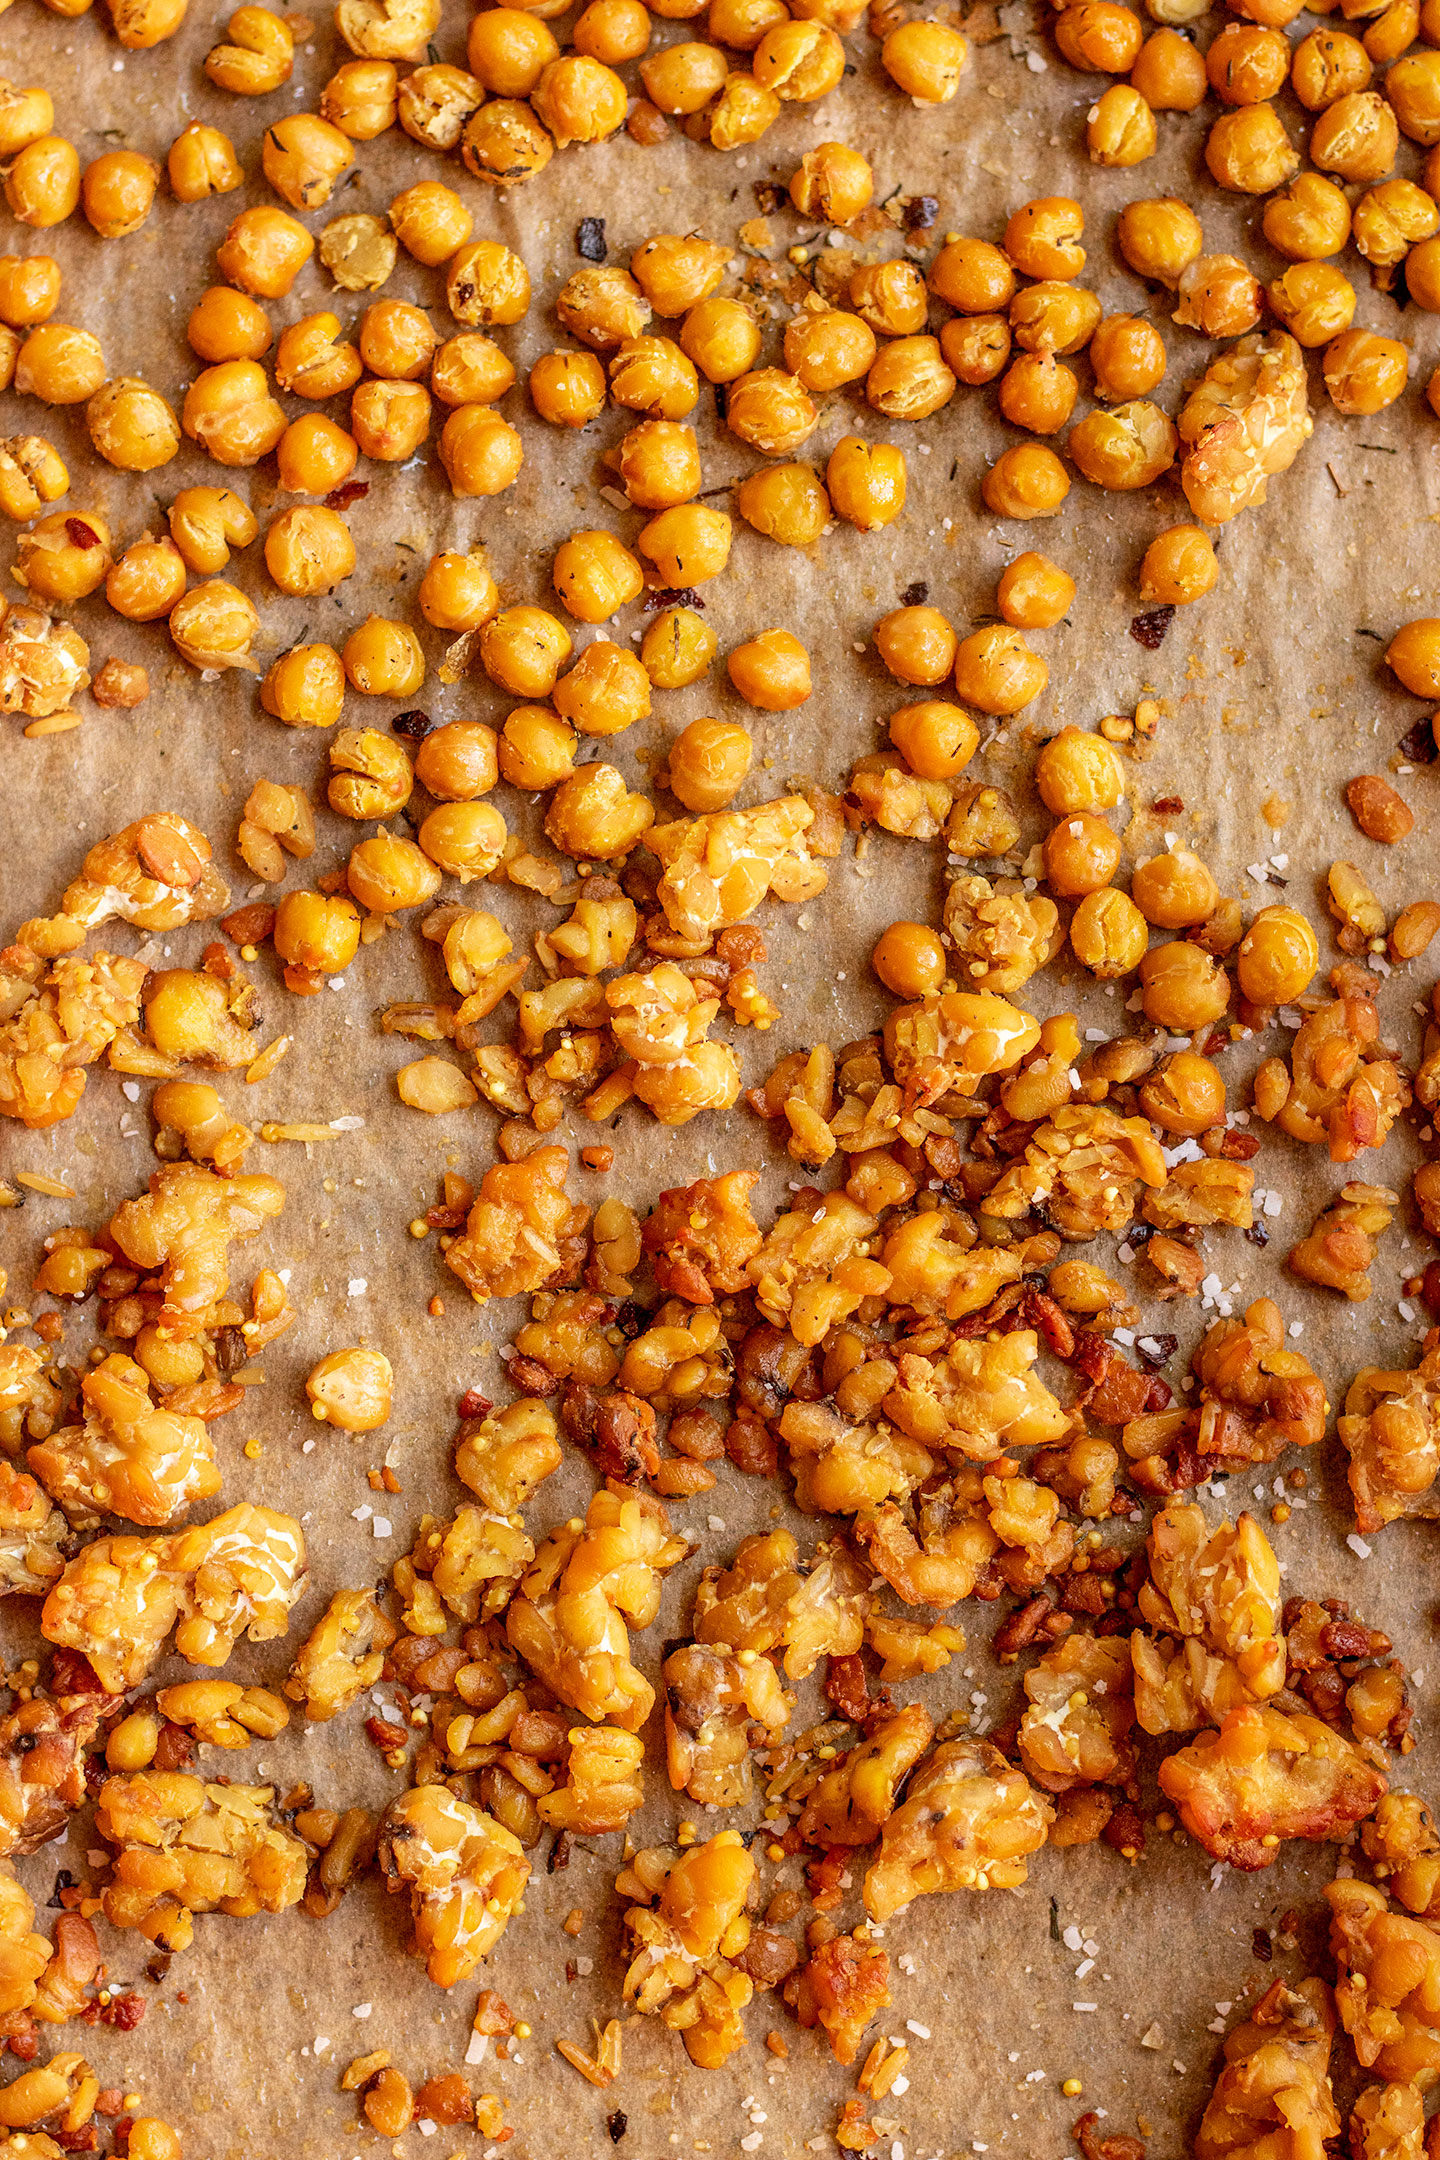 Chickpeas and crumbled tempeh after roasting in the oven, nicely browned and crispy.